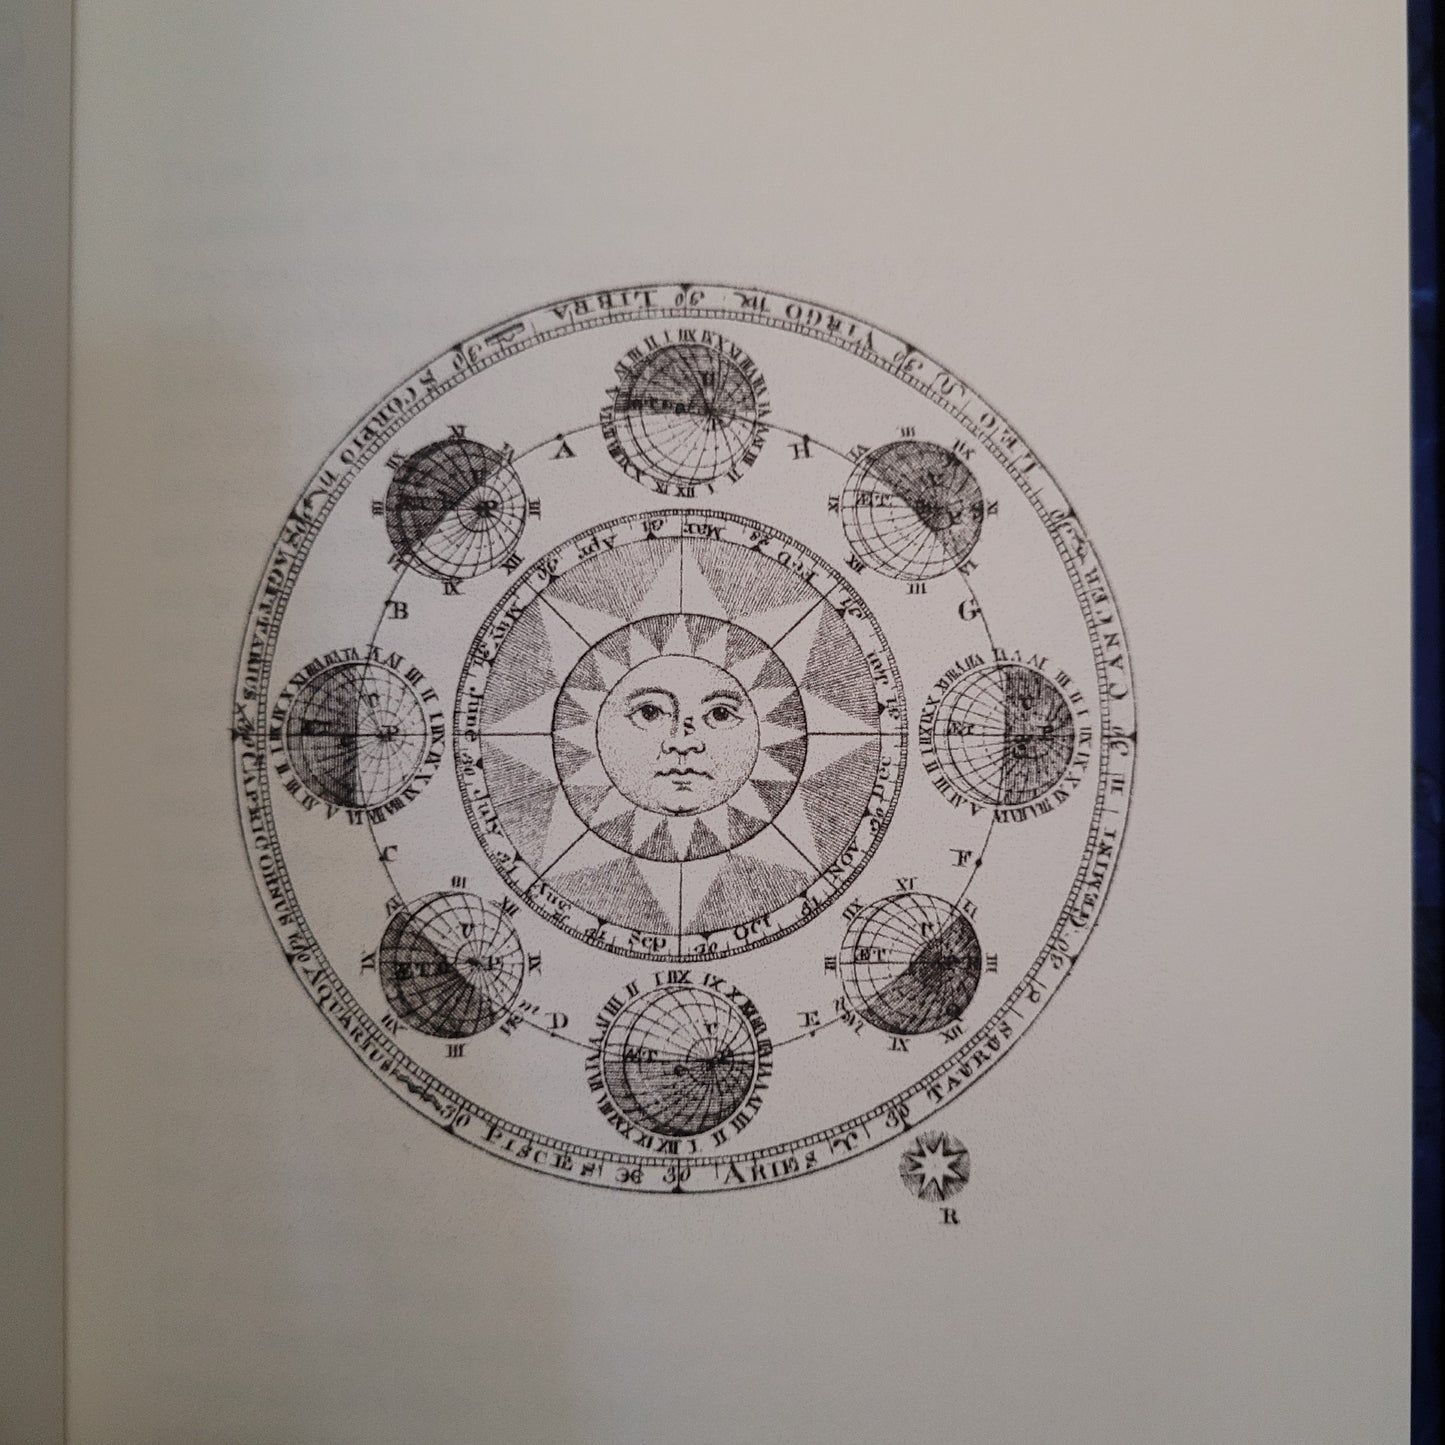 The Starry Rubric: Seventeenth-Century English Astrology and Magic by Alexander Cummins (Hadean Press, 2012) Hardcover